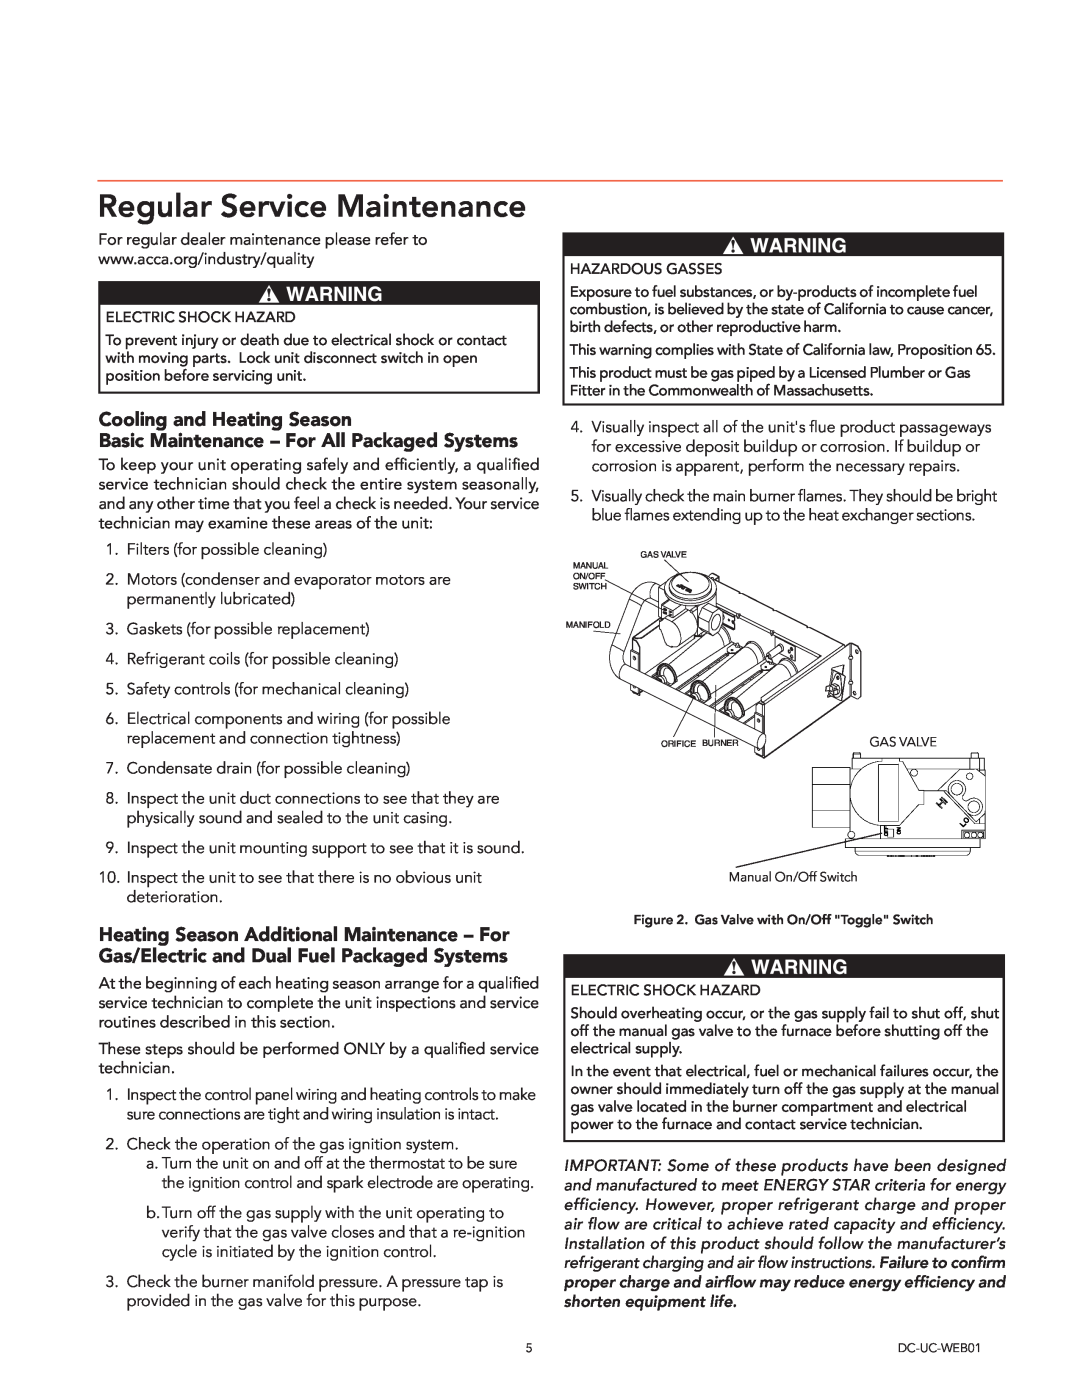 Trane Packaged Systems or All-in-One, DC-UC-WEB01 manual Regular Service Maintenance, Cooling and Heating Season 